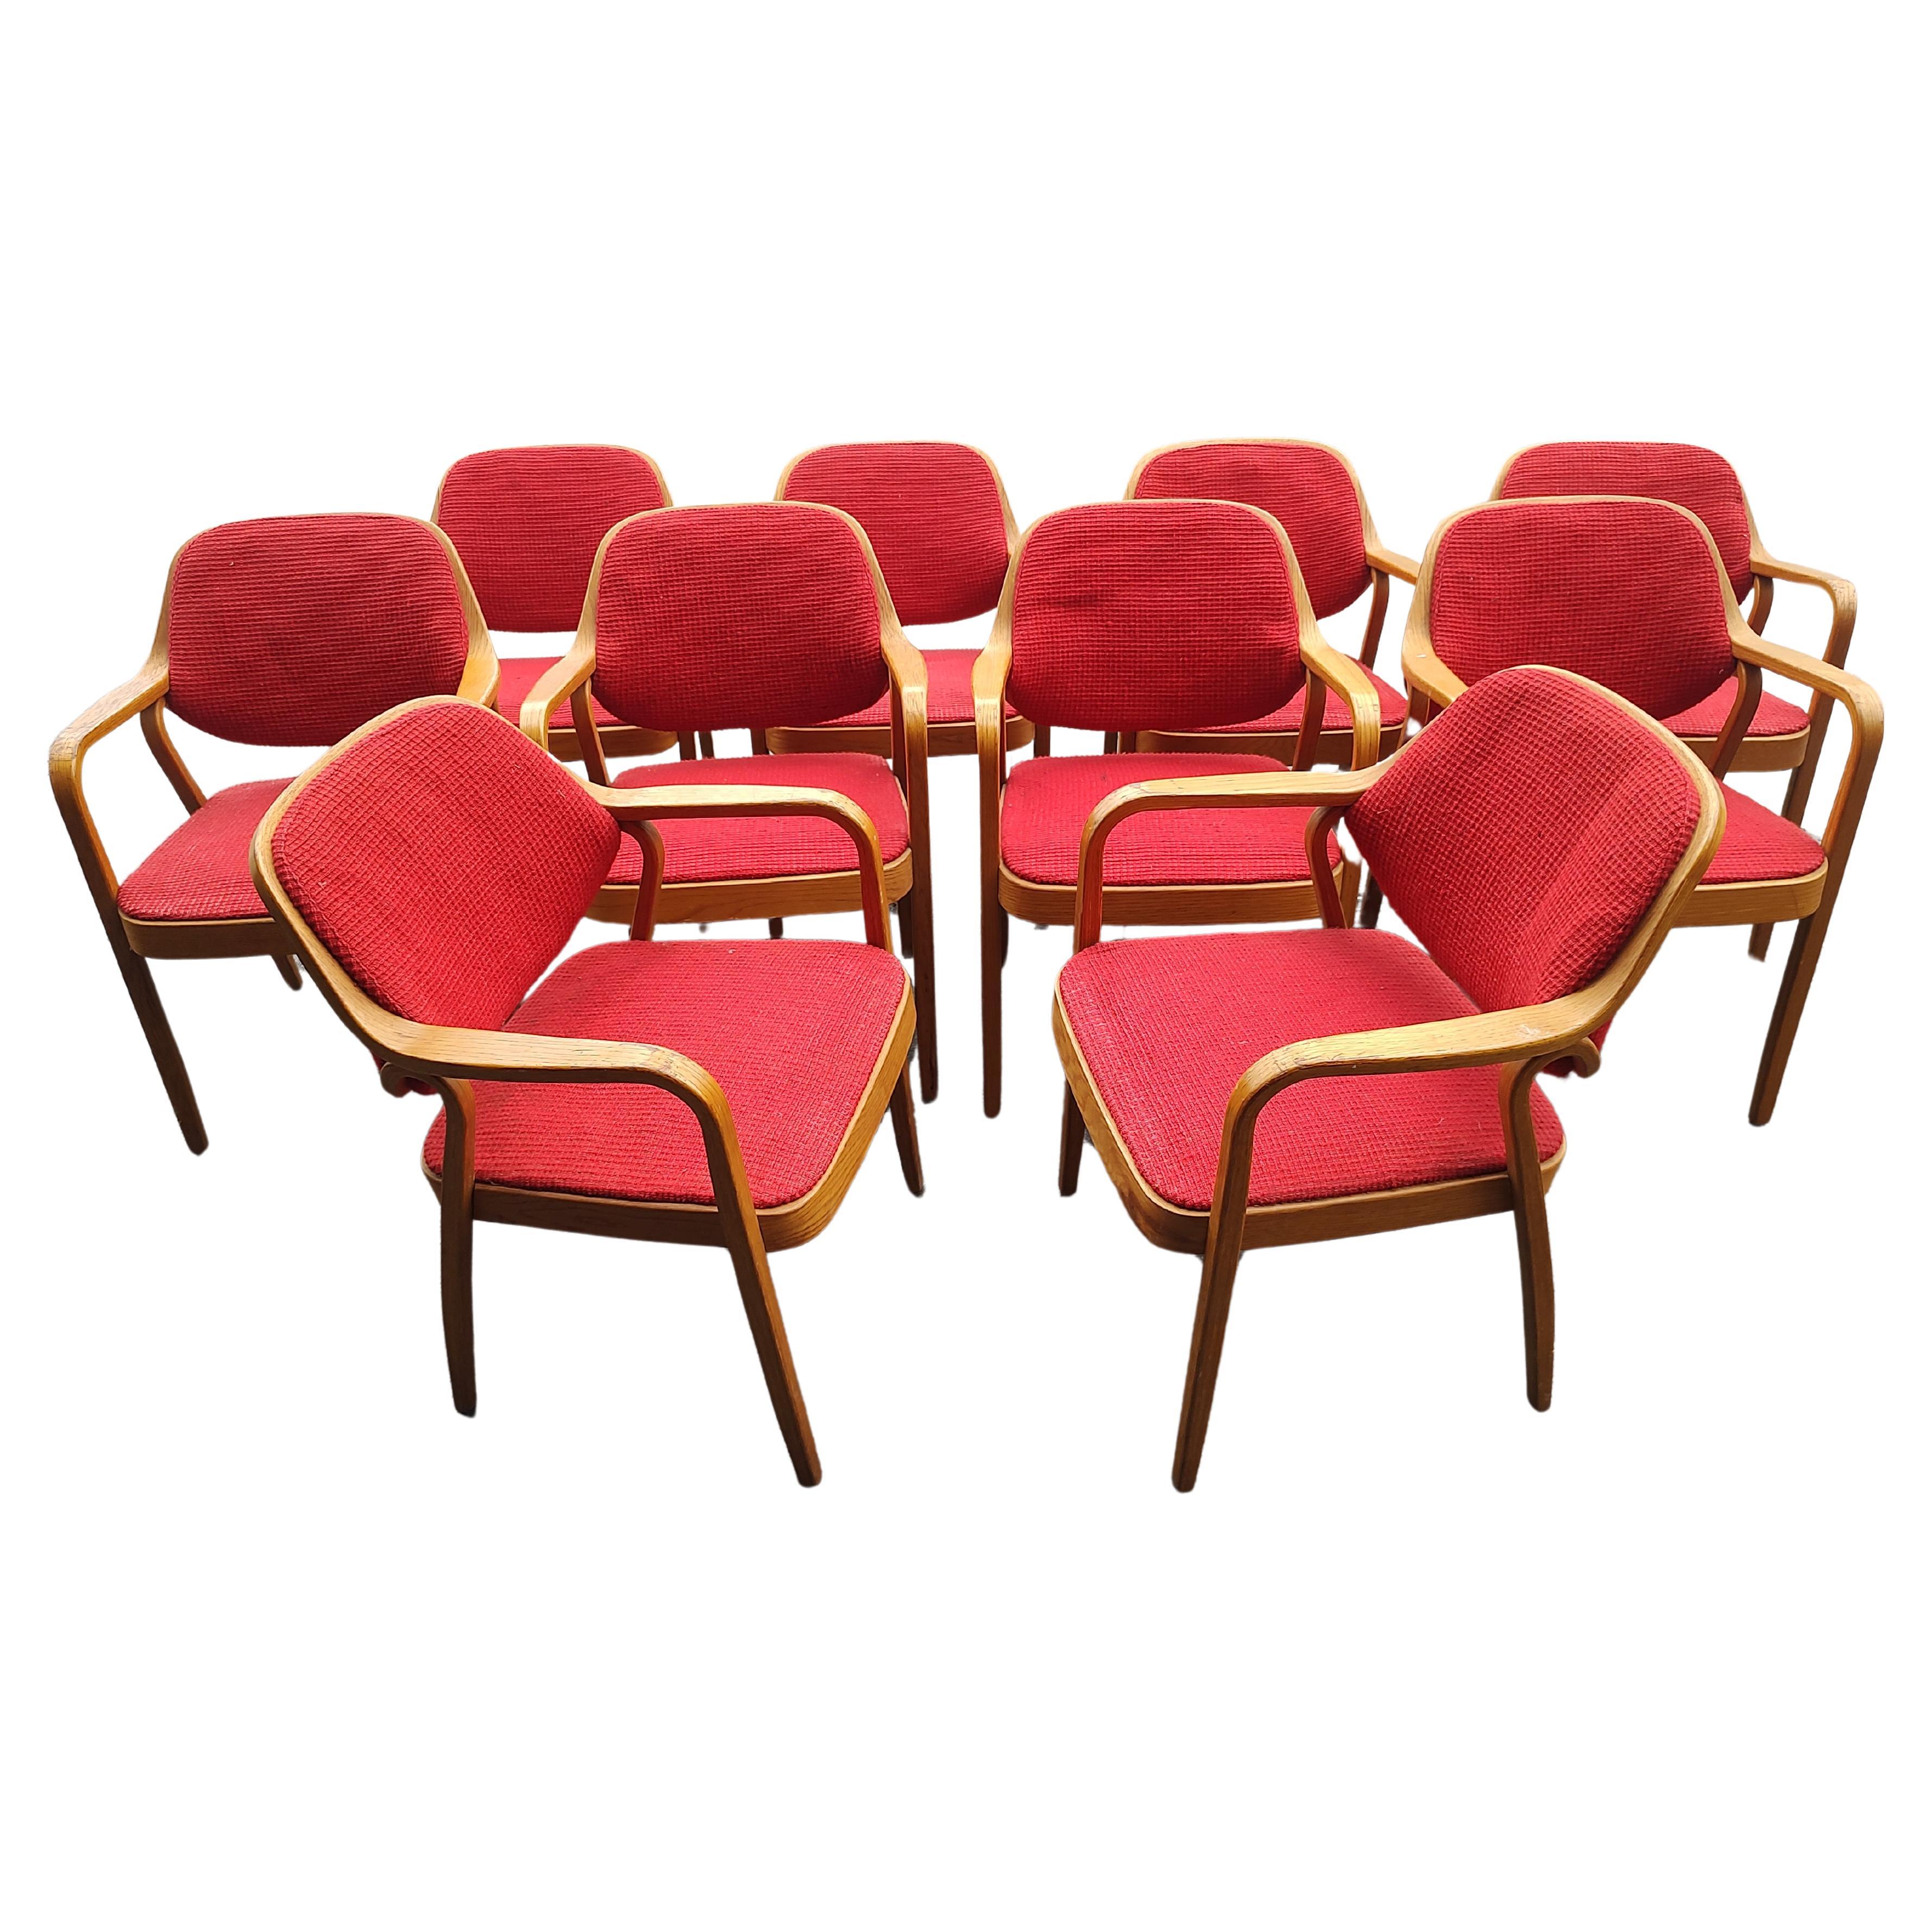 Bill Stephens Dining Room Chairs